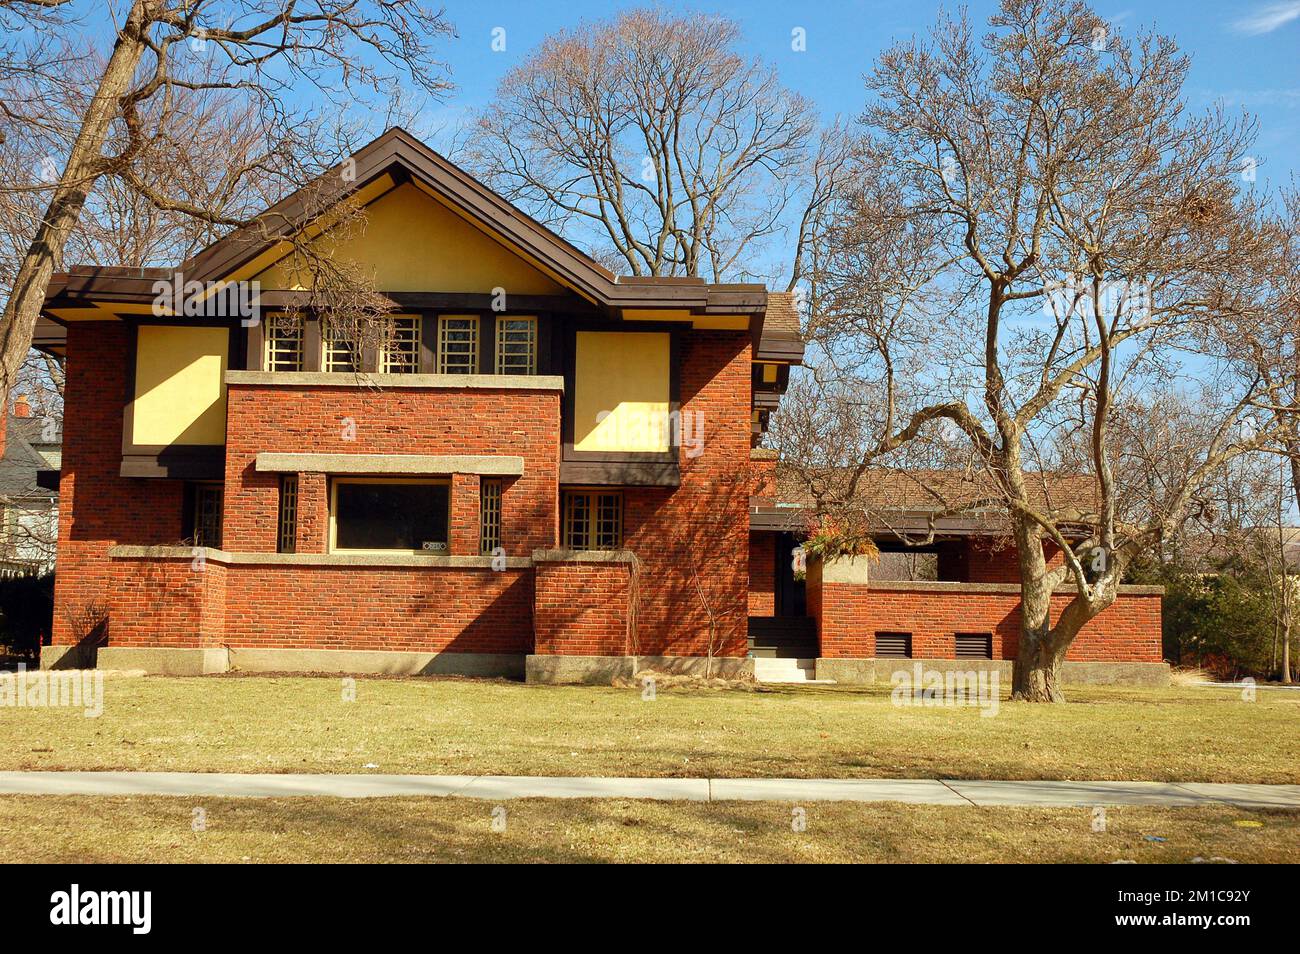 The Frank Thomas House, Designed by famed architect Frank Lloyd Wright in th3e Prairie Style, can be seen in Oak Park, Illinois near Chicago Stock Photo